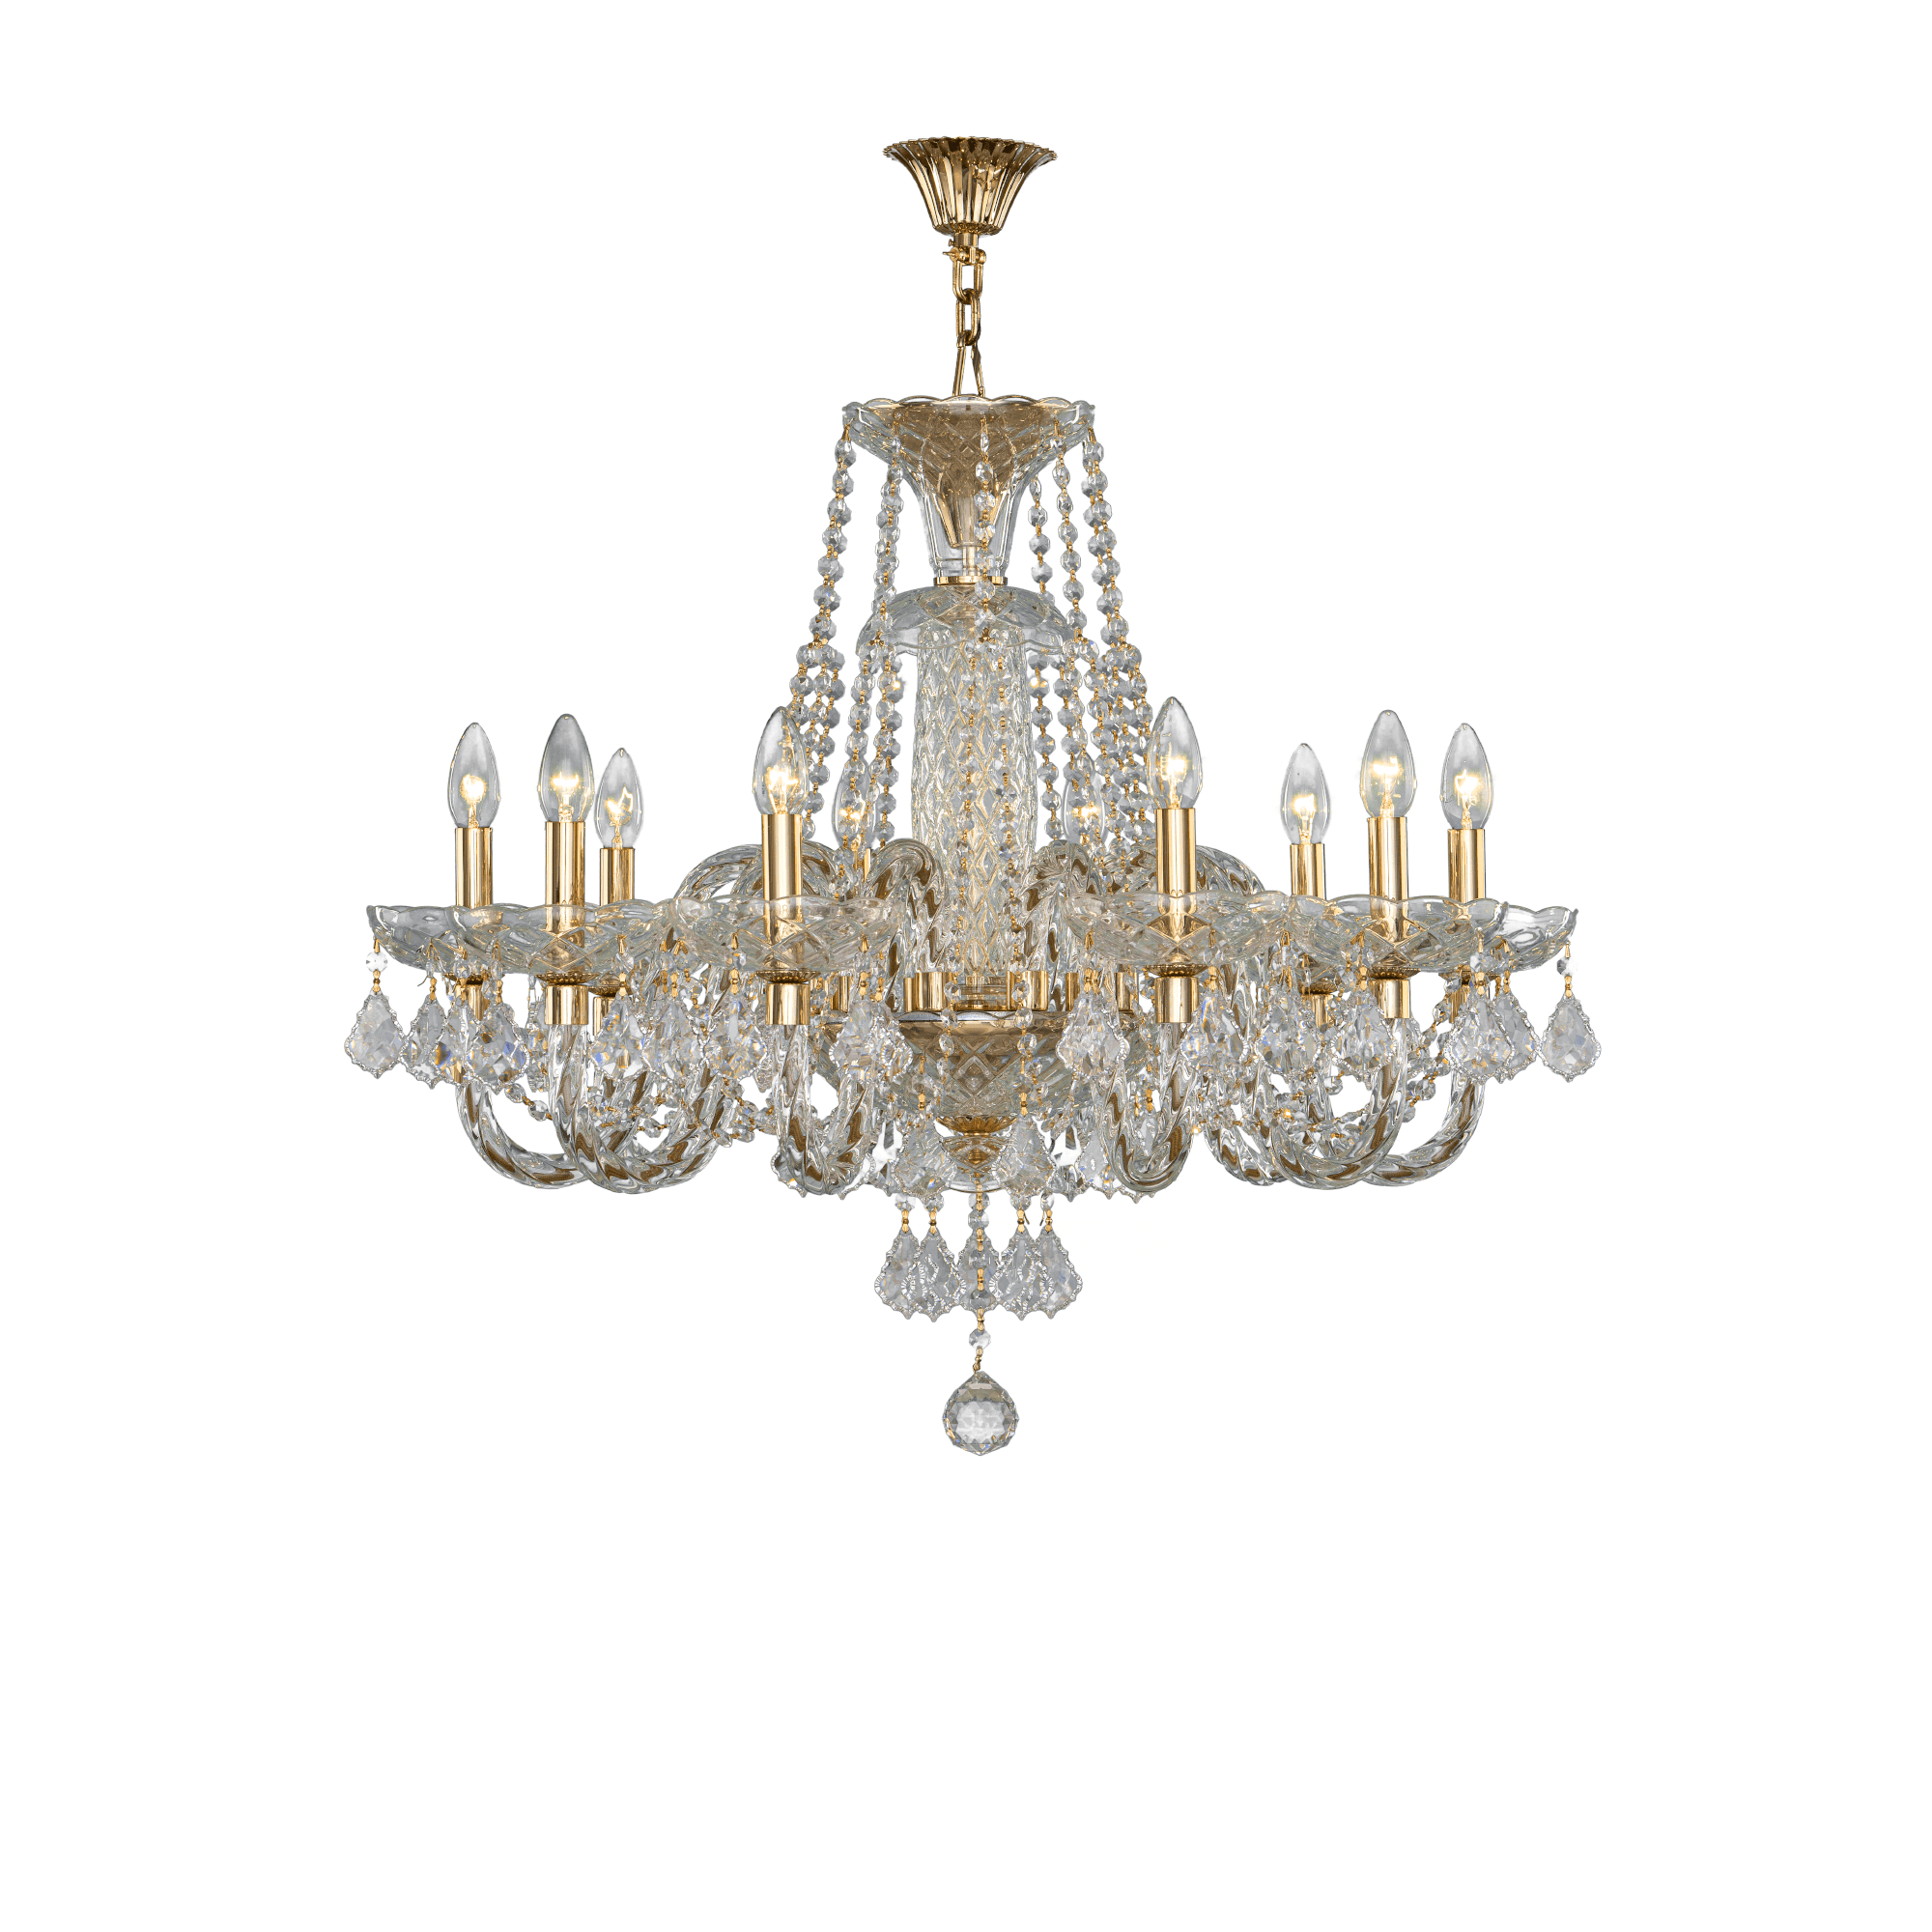 Asfour-Crystal-Lighting-Crystal-Collection-Crystal-Chandelier-10-Bulbs-Gold